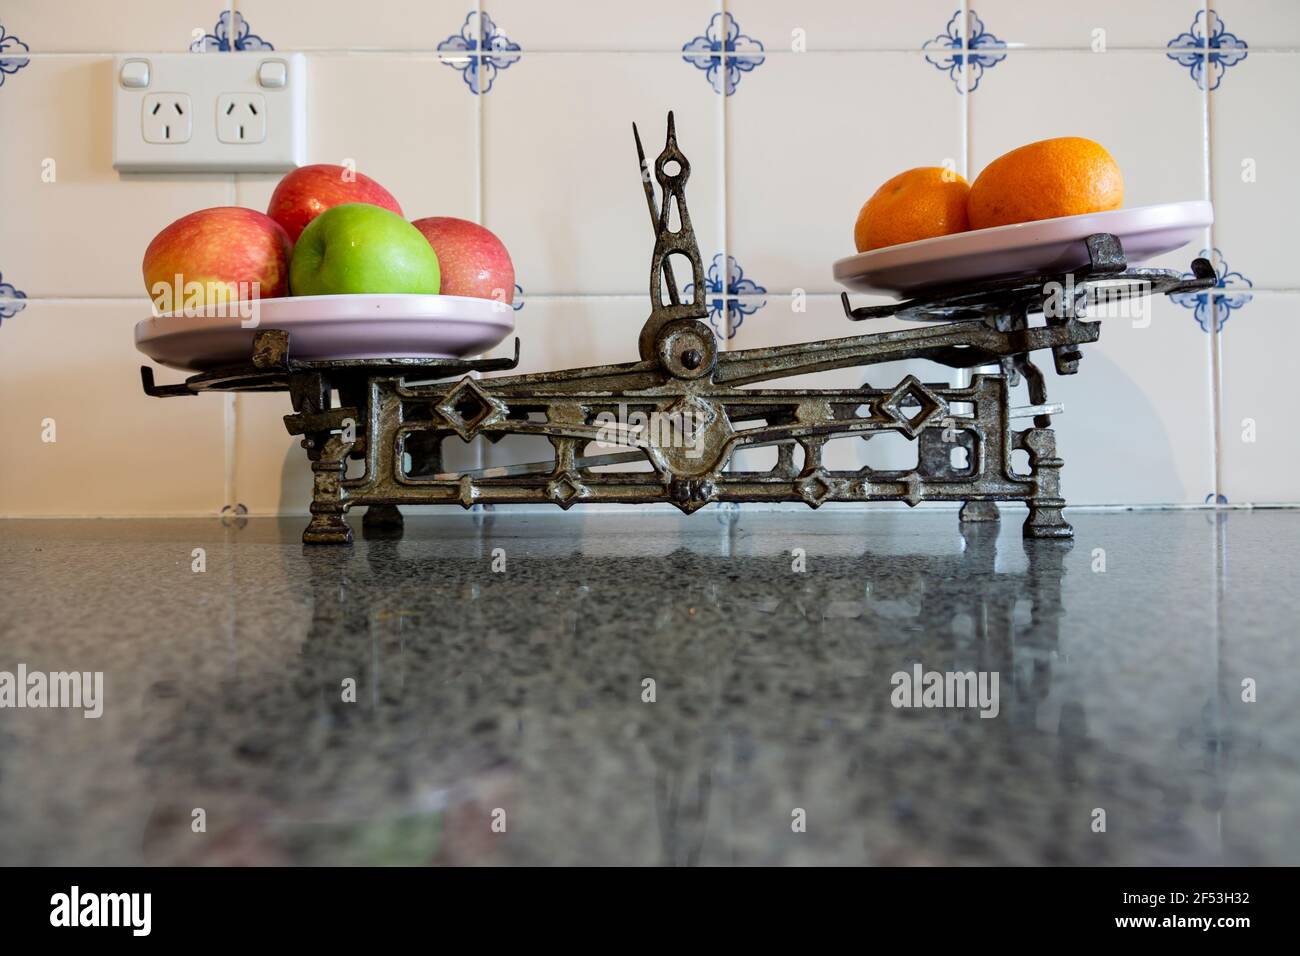 Vintage retro old kitchen iron kitchen scales with red and green apples and oranges on a granite kitchen bench. Stock Photo